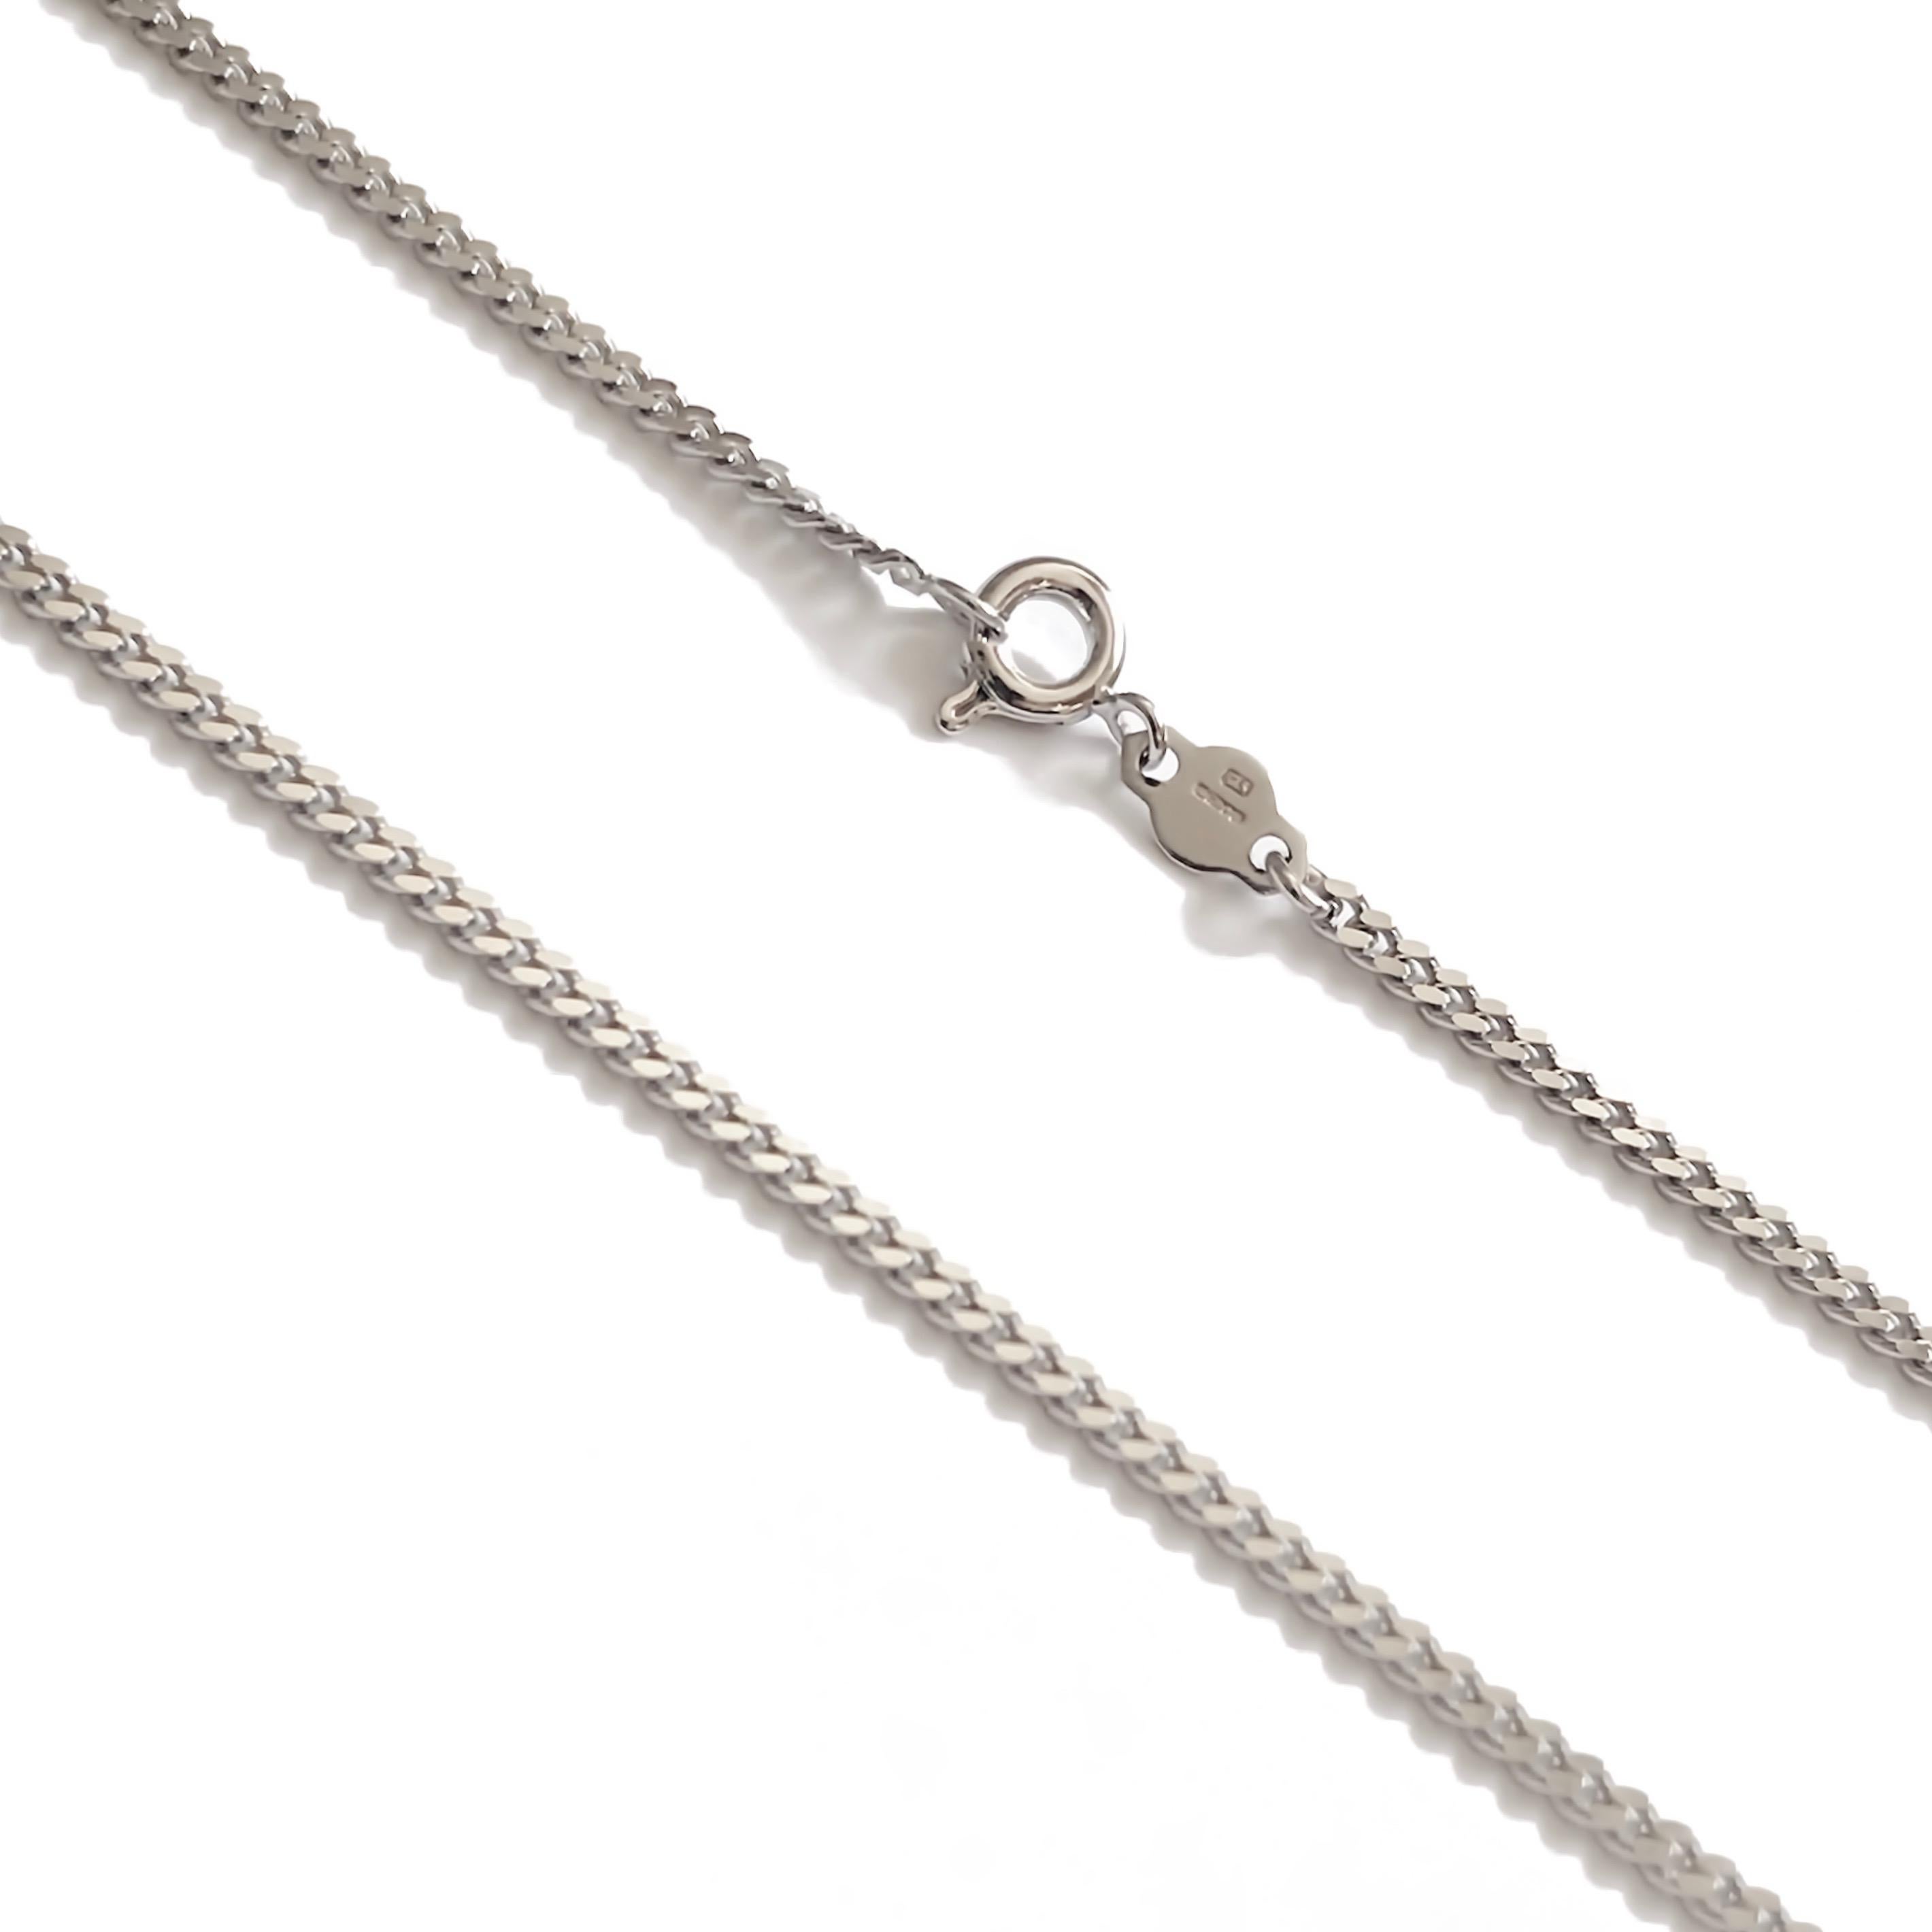 This classic curb chain necklace is made of 18 Karat solid white gold.
Length: 44.00 cm
Weight: 6.65 g
Gauge: 1.9 mm
Hallmark: London Goldsmiths’ Company – Assay Office
All our jewellery are new and have never been previously owned or worn. 
We are